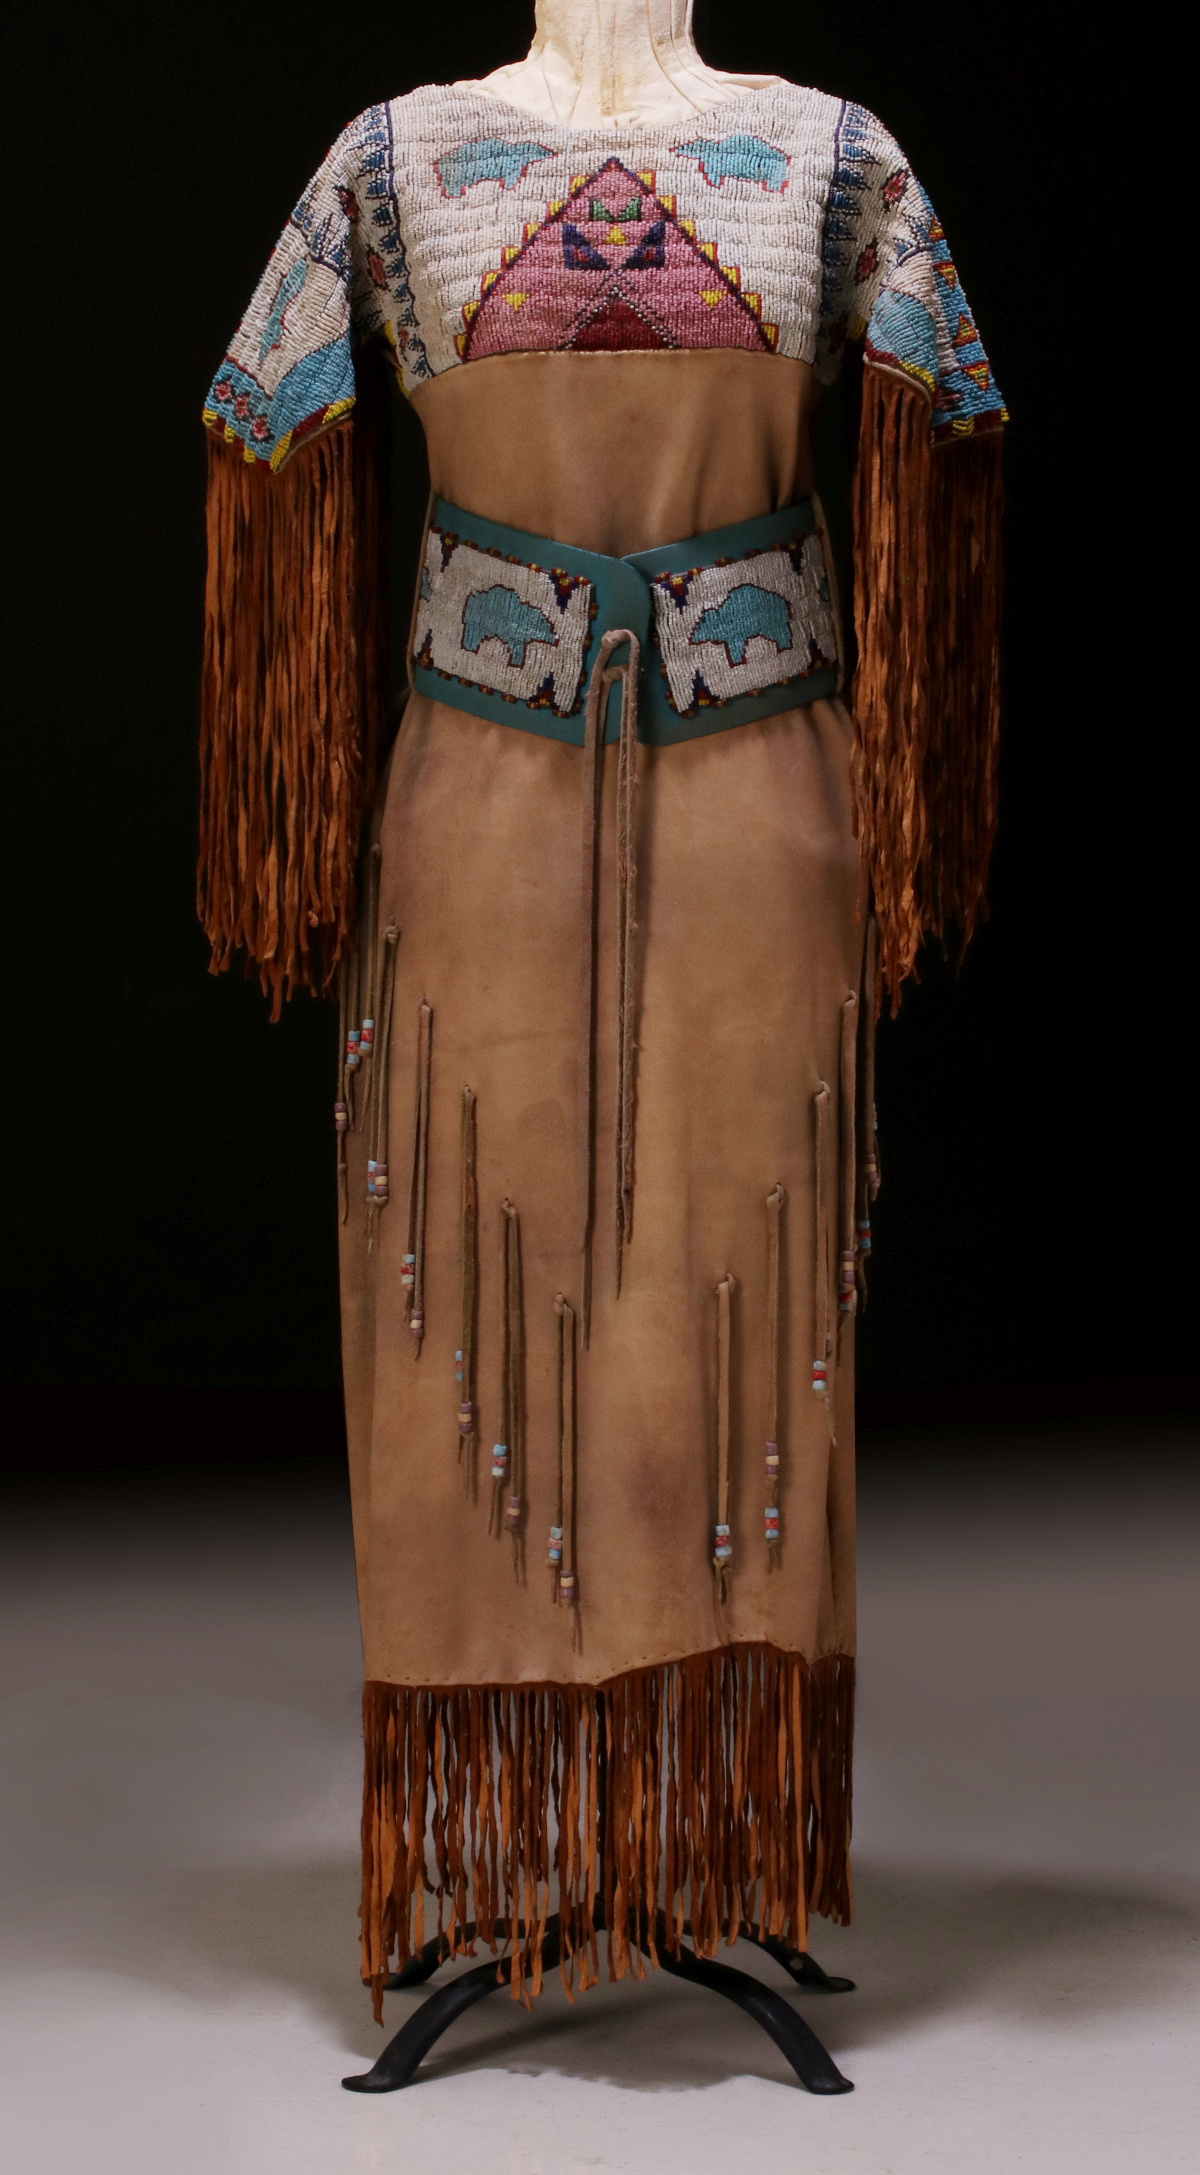 A LAKOTA SIOUX BEADED HIDE DRESS BY CHARLES FAST HORSE